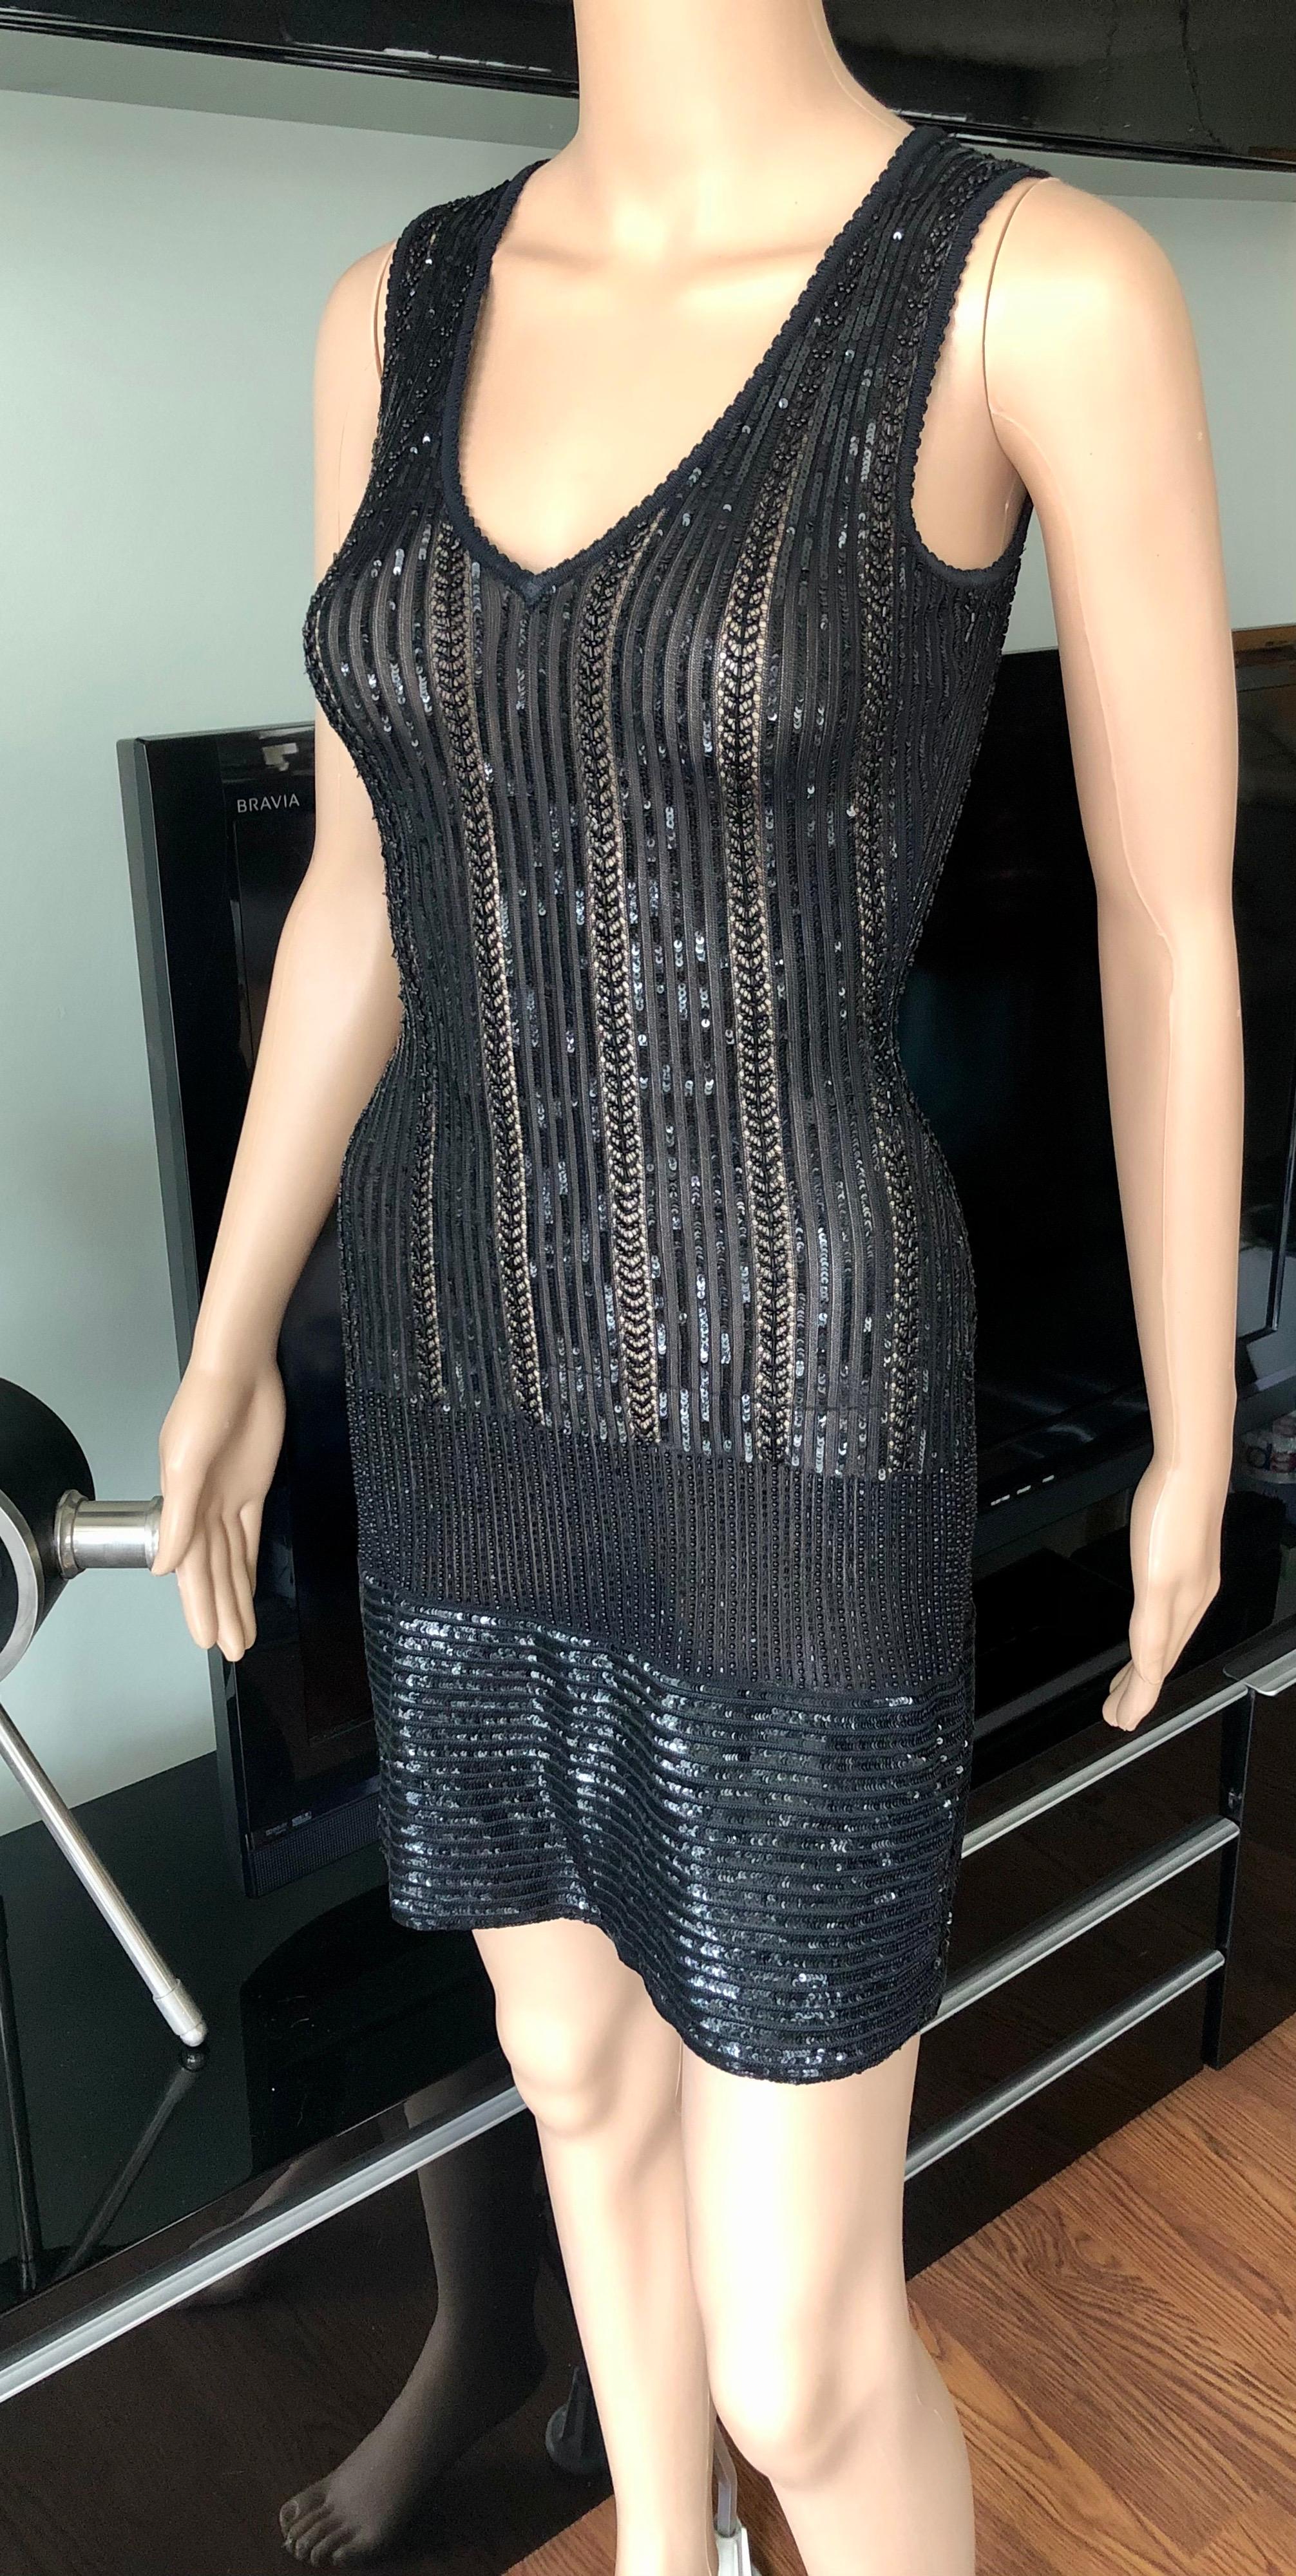 Azzedine Alaia Vintage S/S 1996 Runway Black Sequin Embellished Mini Dress In Excellent Condition For Sale In Naples, FL